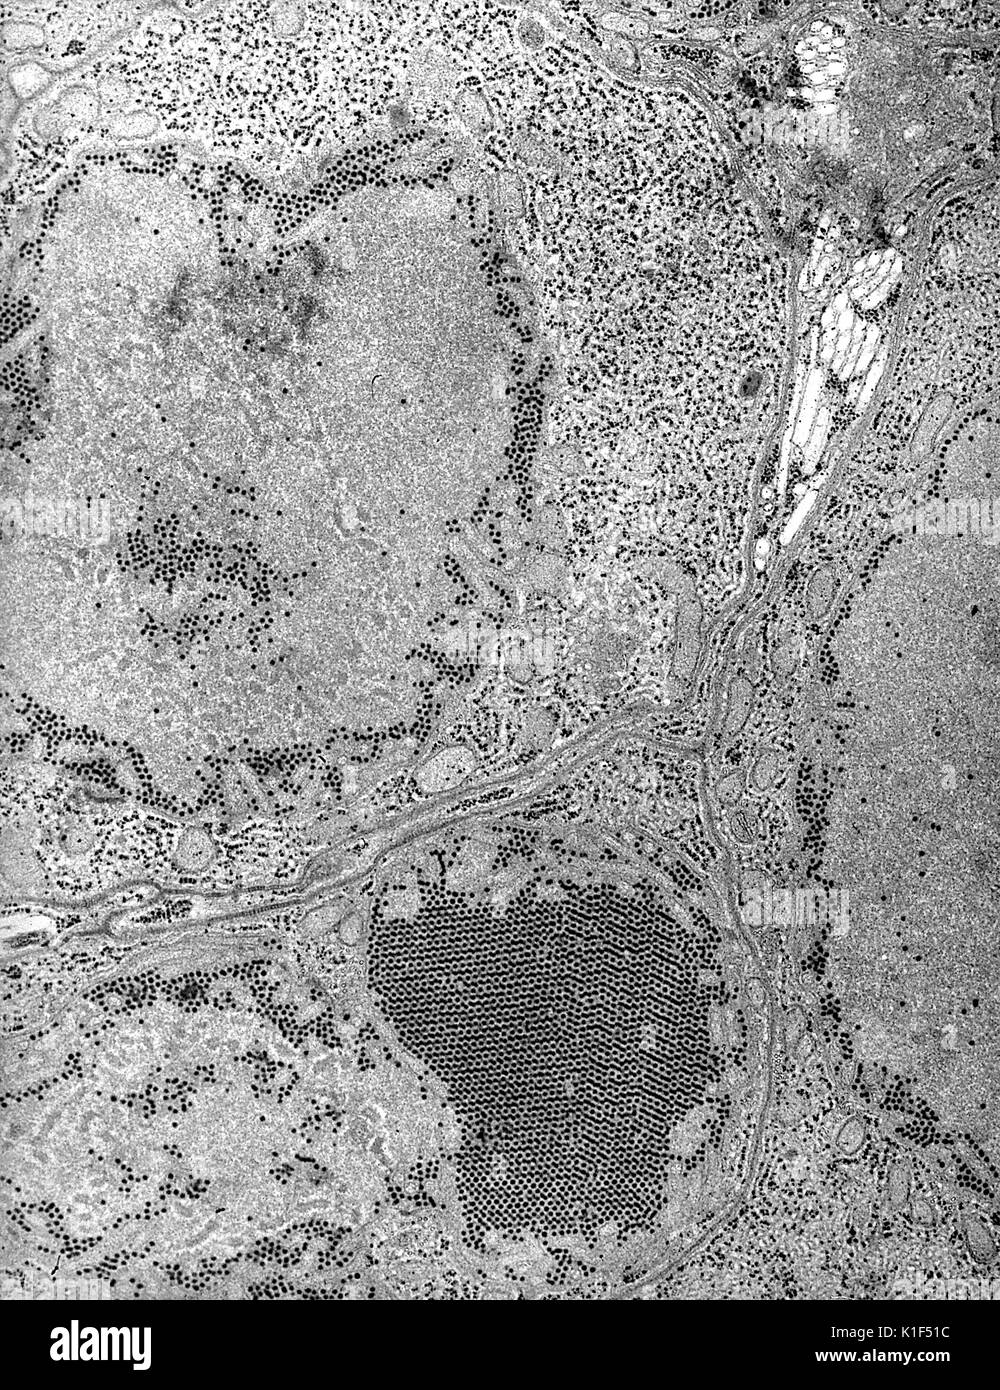 Electron micrograph of the St. Louis Encephalitis (SLE) virus. St. Louis Encephalitis (SLE) virus seen in a mosquito salivary gland, is normally transmitted to humans though the bite of a Culex mosquito. Image courtesy CDC/Dr. Fred Murphy, Sylvia Whitfield, 1975. Stock Photo